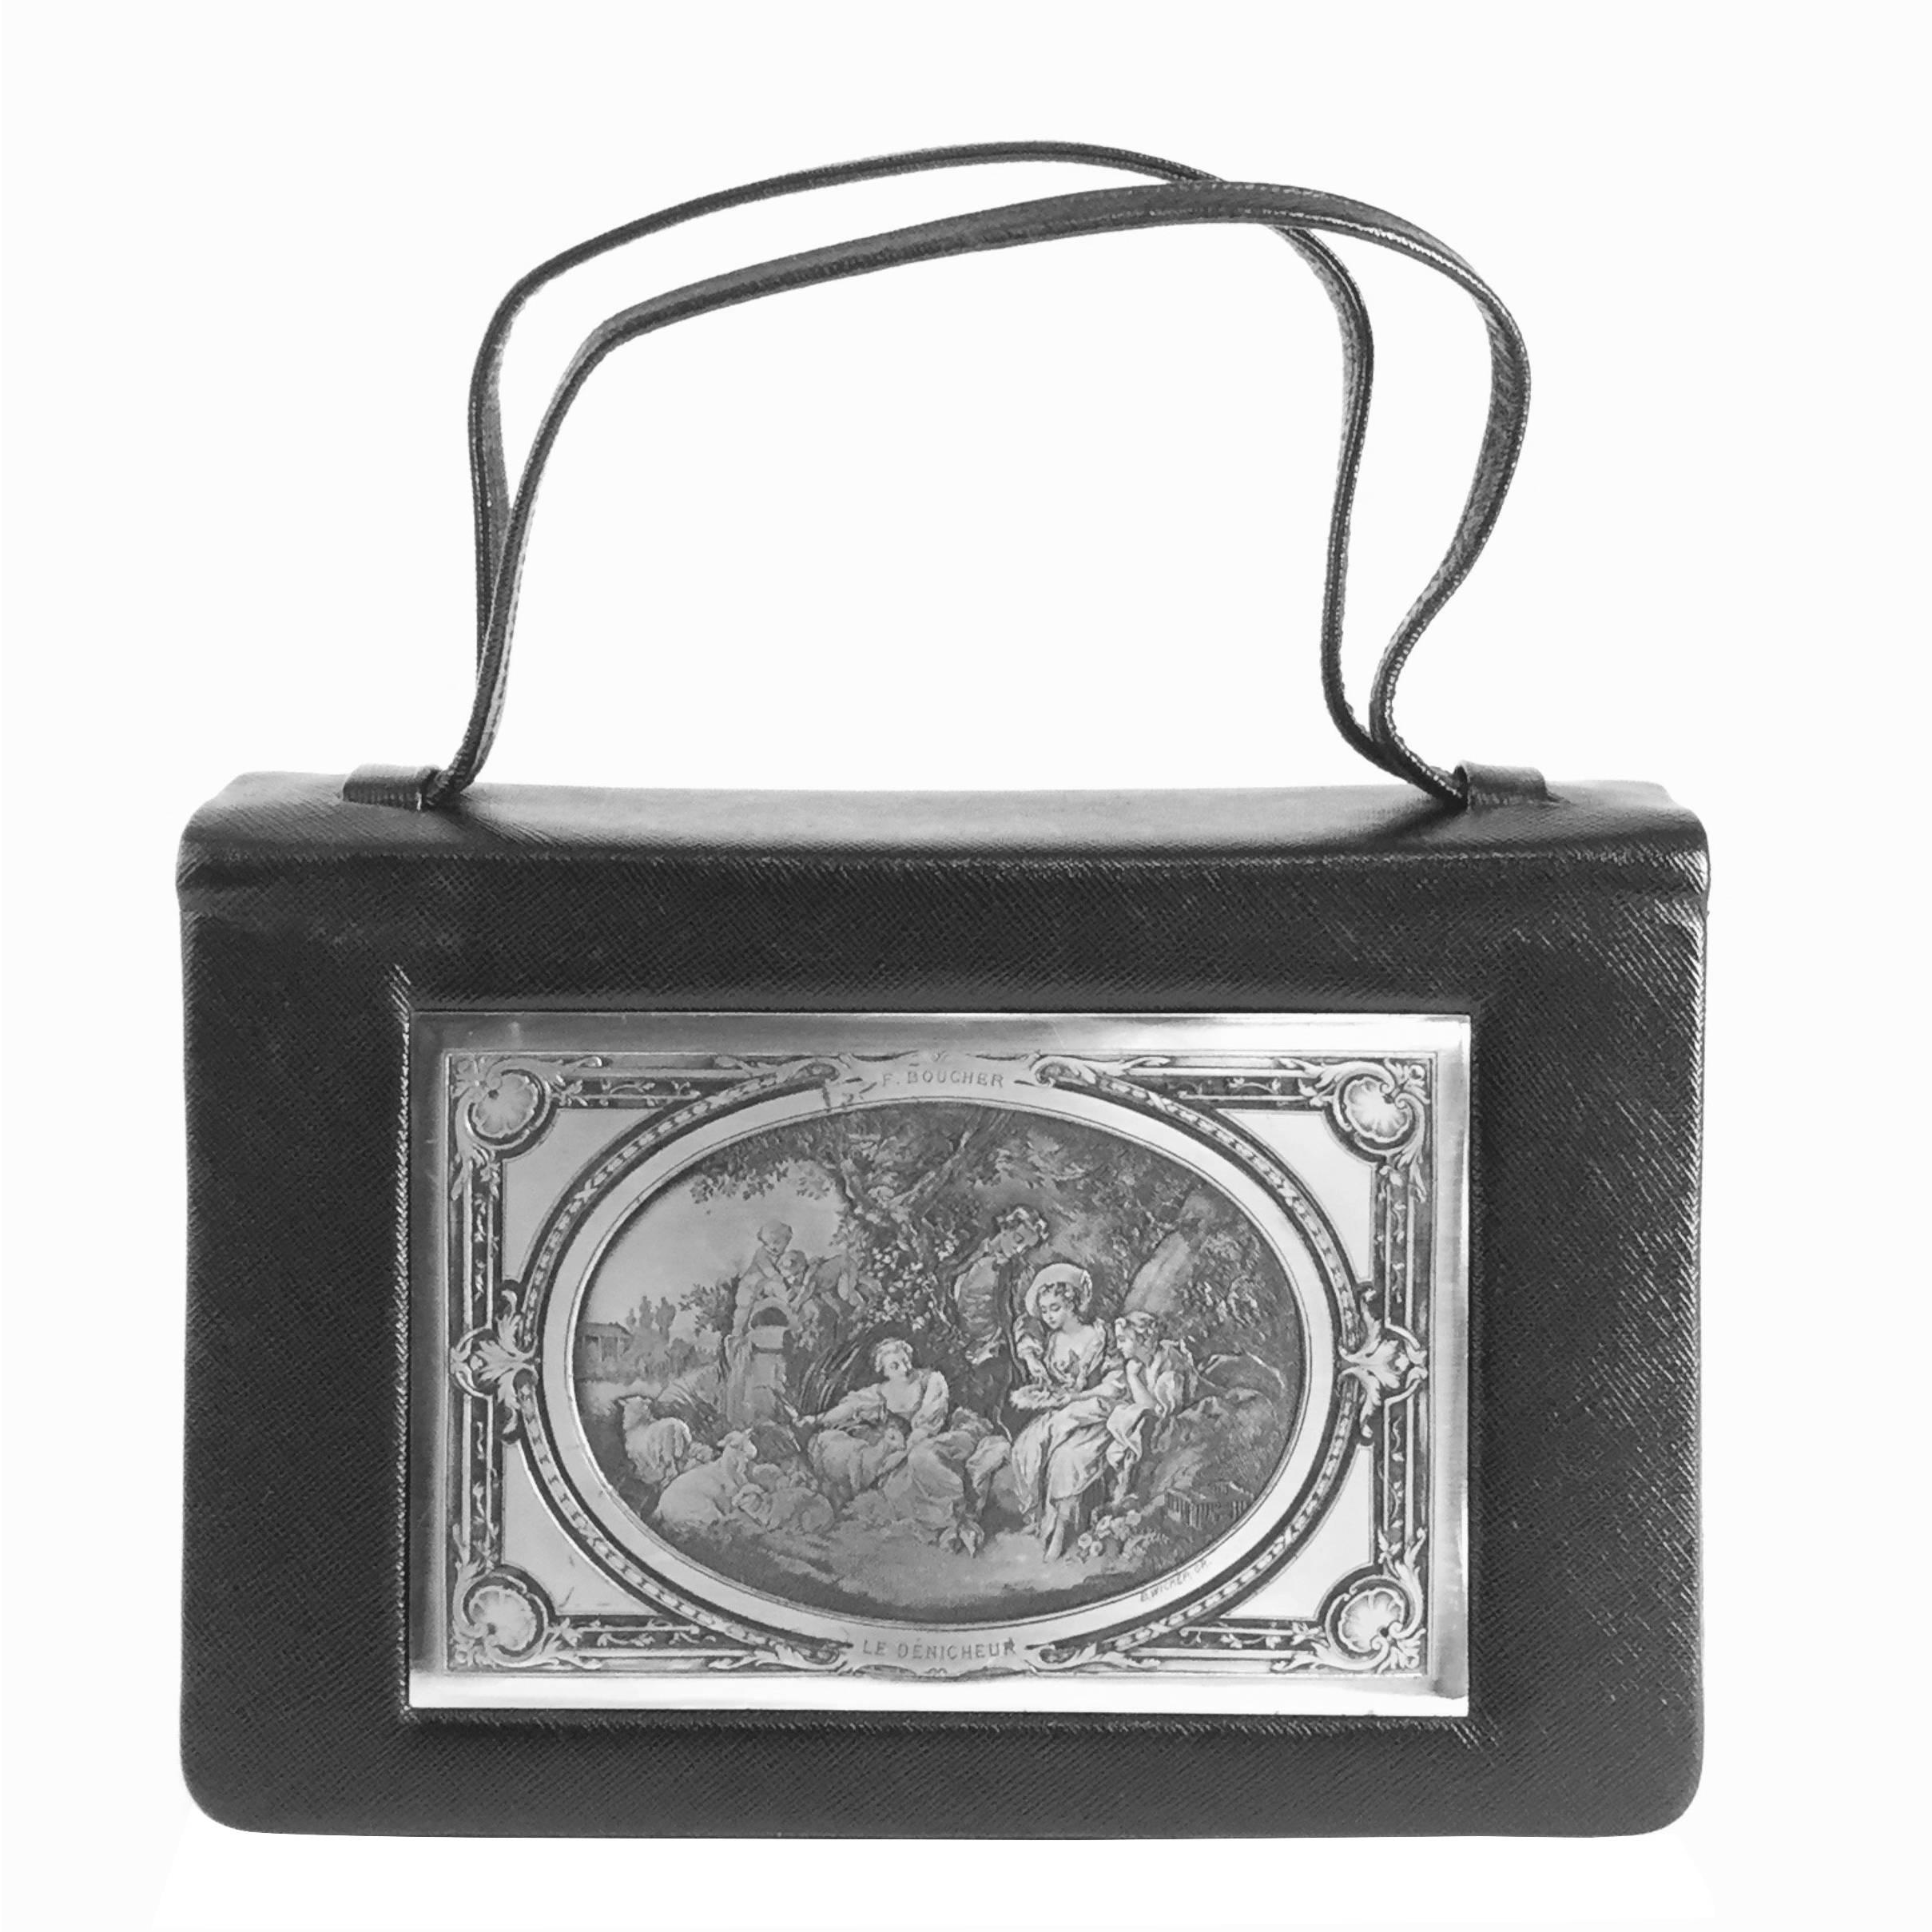 1960s Rosenfeld, F. Boucher's The Nest Rococo Printing Plate Purse For Sale